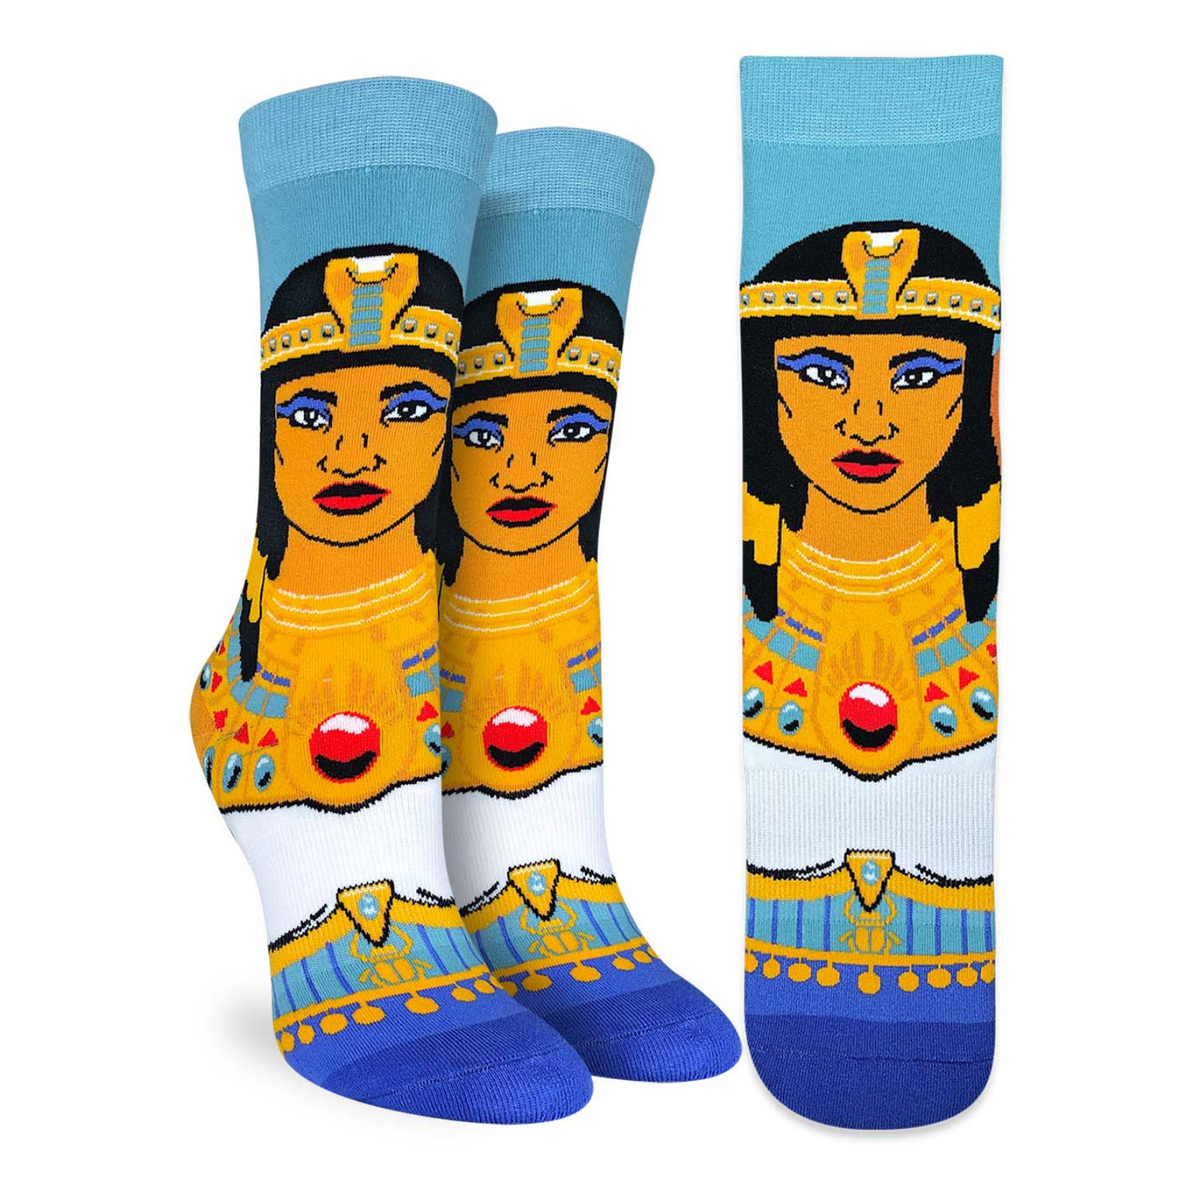 Good Luck Sock Cleopatra women&#39;s sock featuring the face of Cleopatra wearing a crown on display